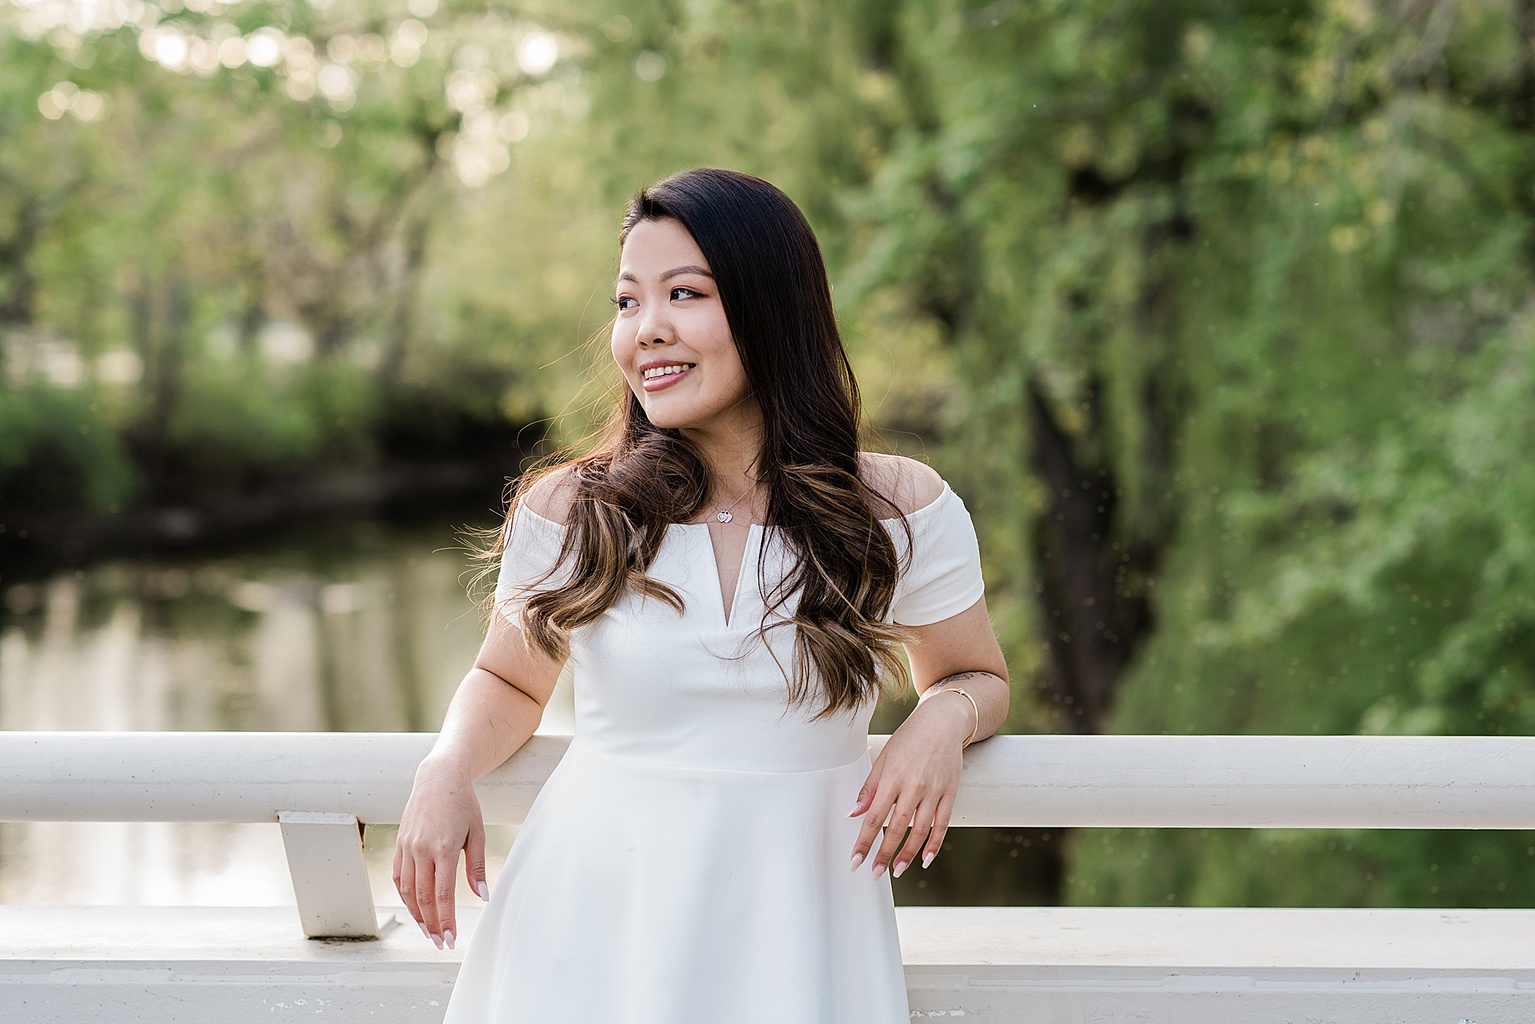 Michigan State Senior grad photoshoot on MSU's campus, photo of a woman in a white dress on the bridge by Spartan Stadium with the river in the background, by Allie Siarto & Co., East Lansing photographers